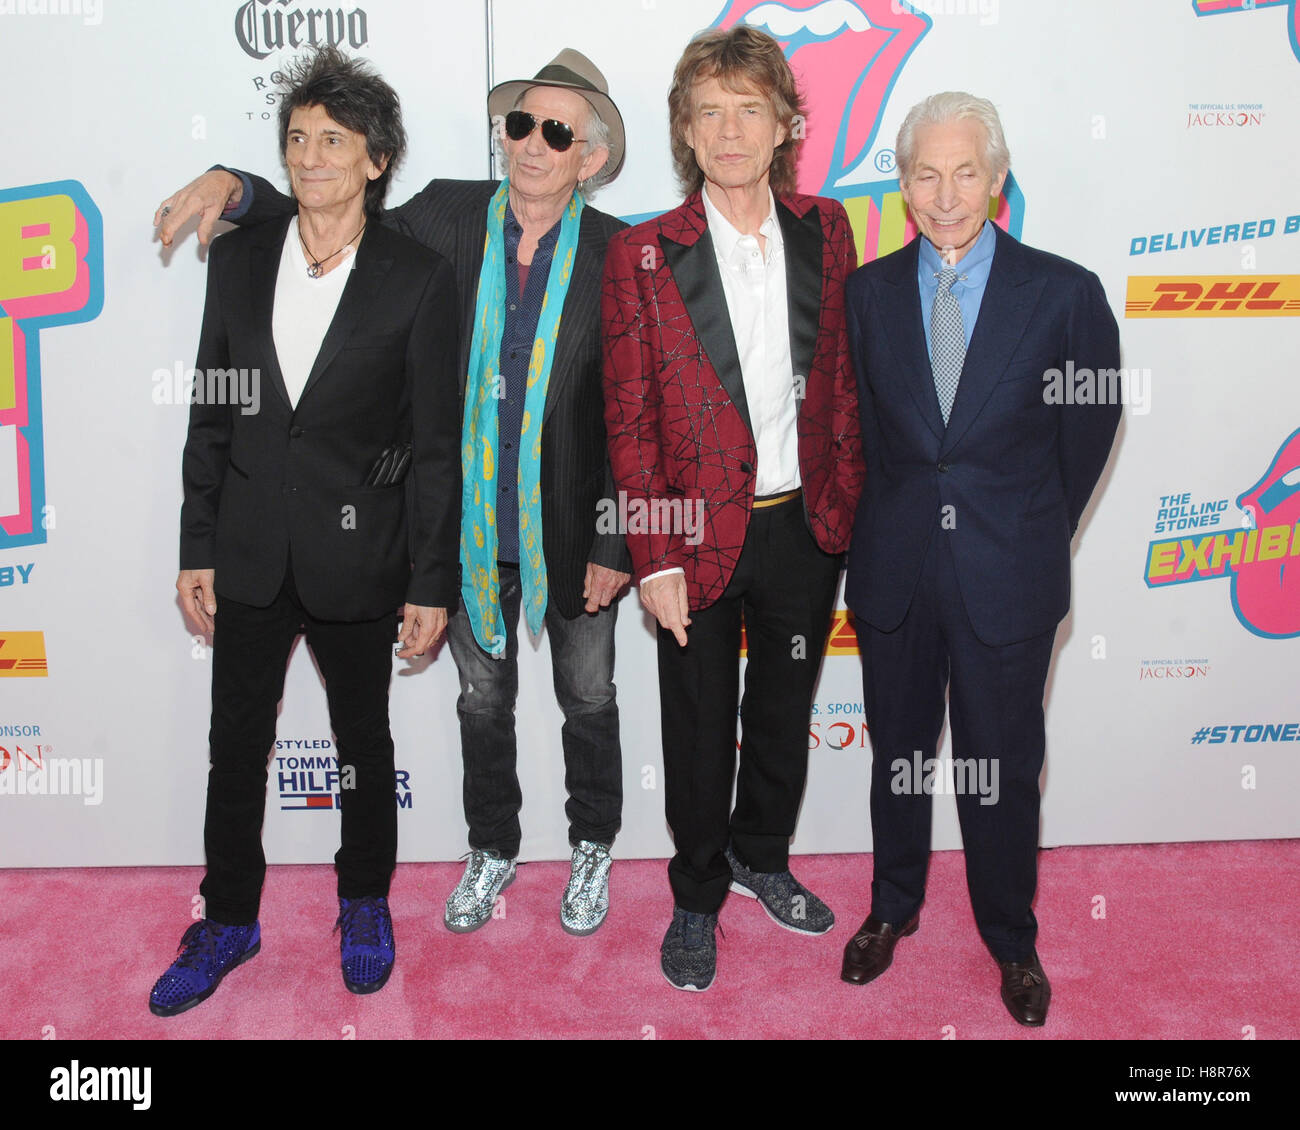 New York, NY, USA. 15th Nov, 2016. (L-R) Ronnie Wood, Keith Richards, Mick Jagger and Charlie Watts of The Rolling Stones attend The Rolling Stones Exhibitionism opening night at Industria Superstudio on November 15, 2016 in New York City. © John Palmer M Stock Photo